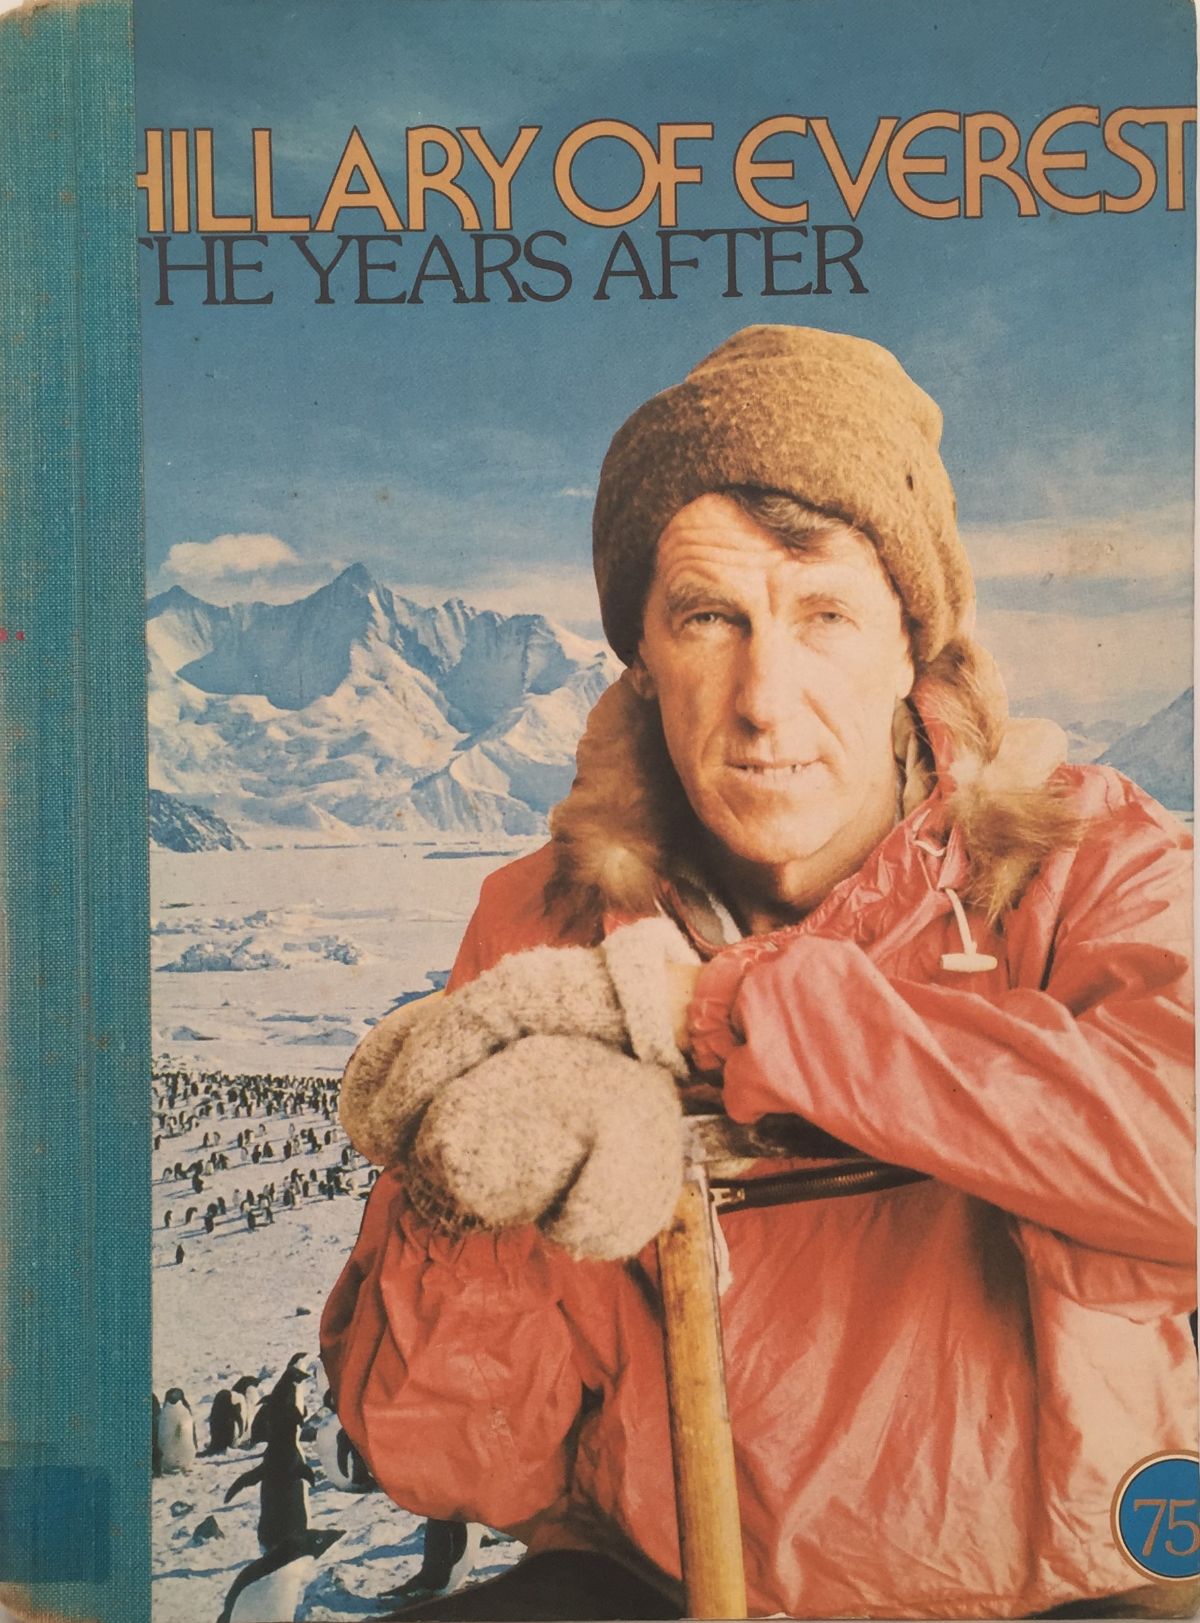 Hillary of Everest: The Years After